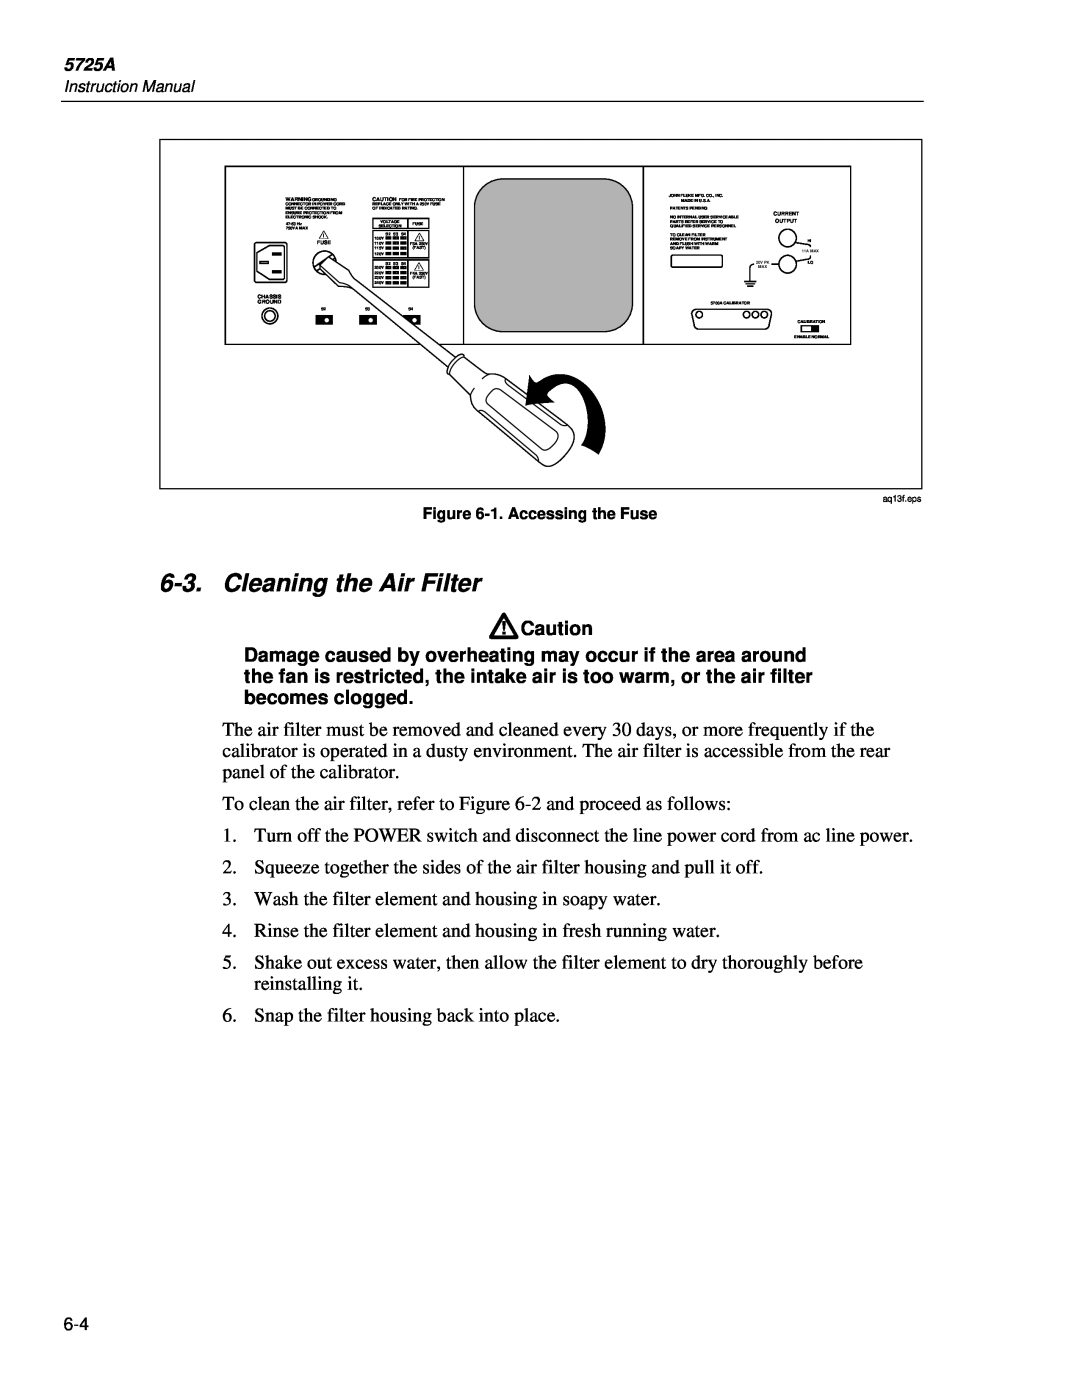 Fluke 5725A instruction manual Cleaning the Air Filter 